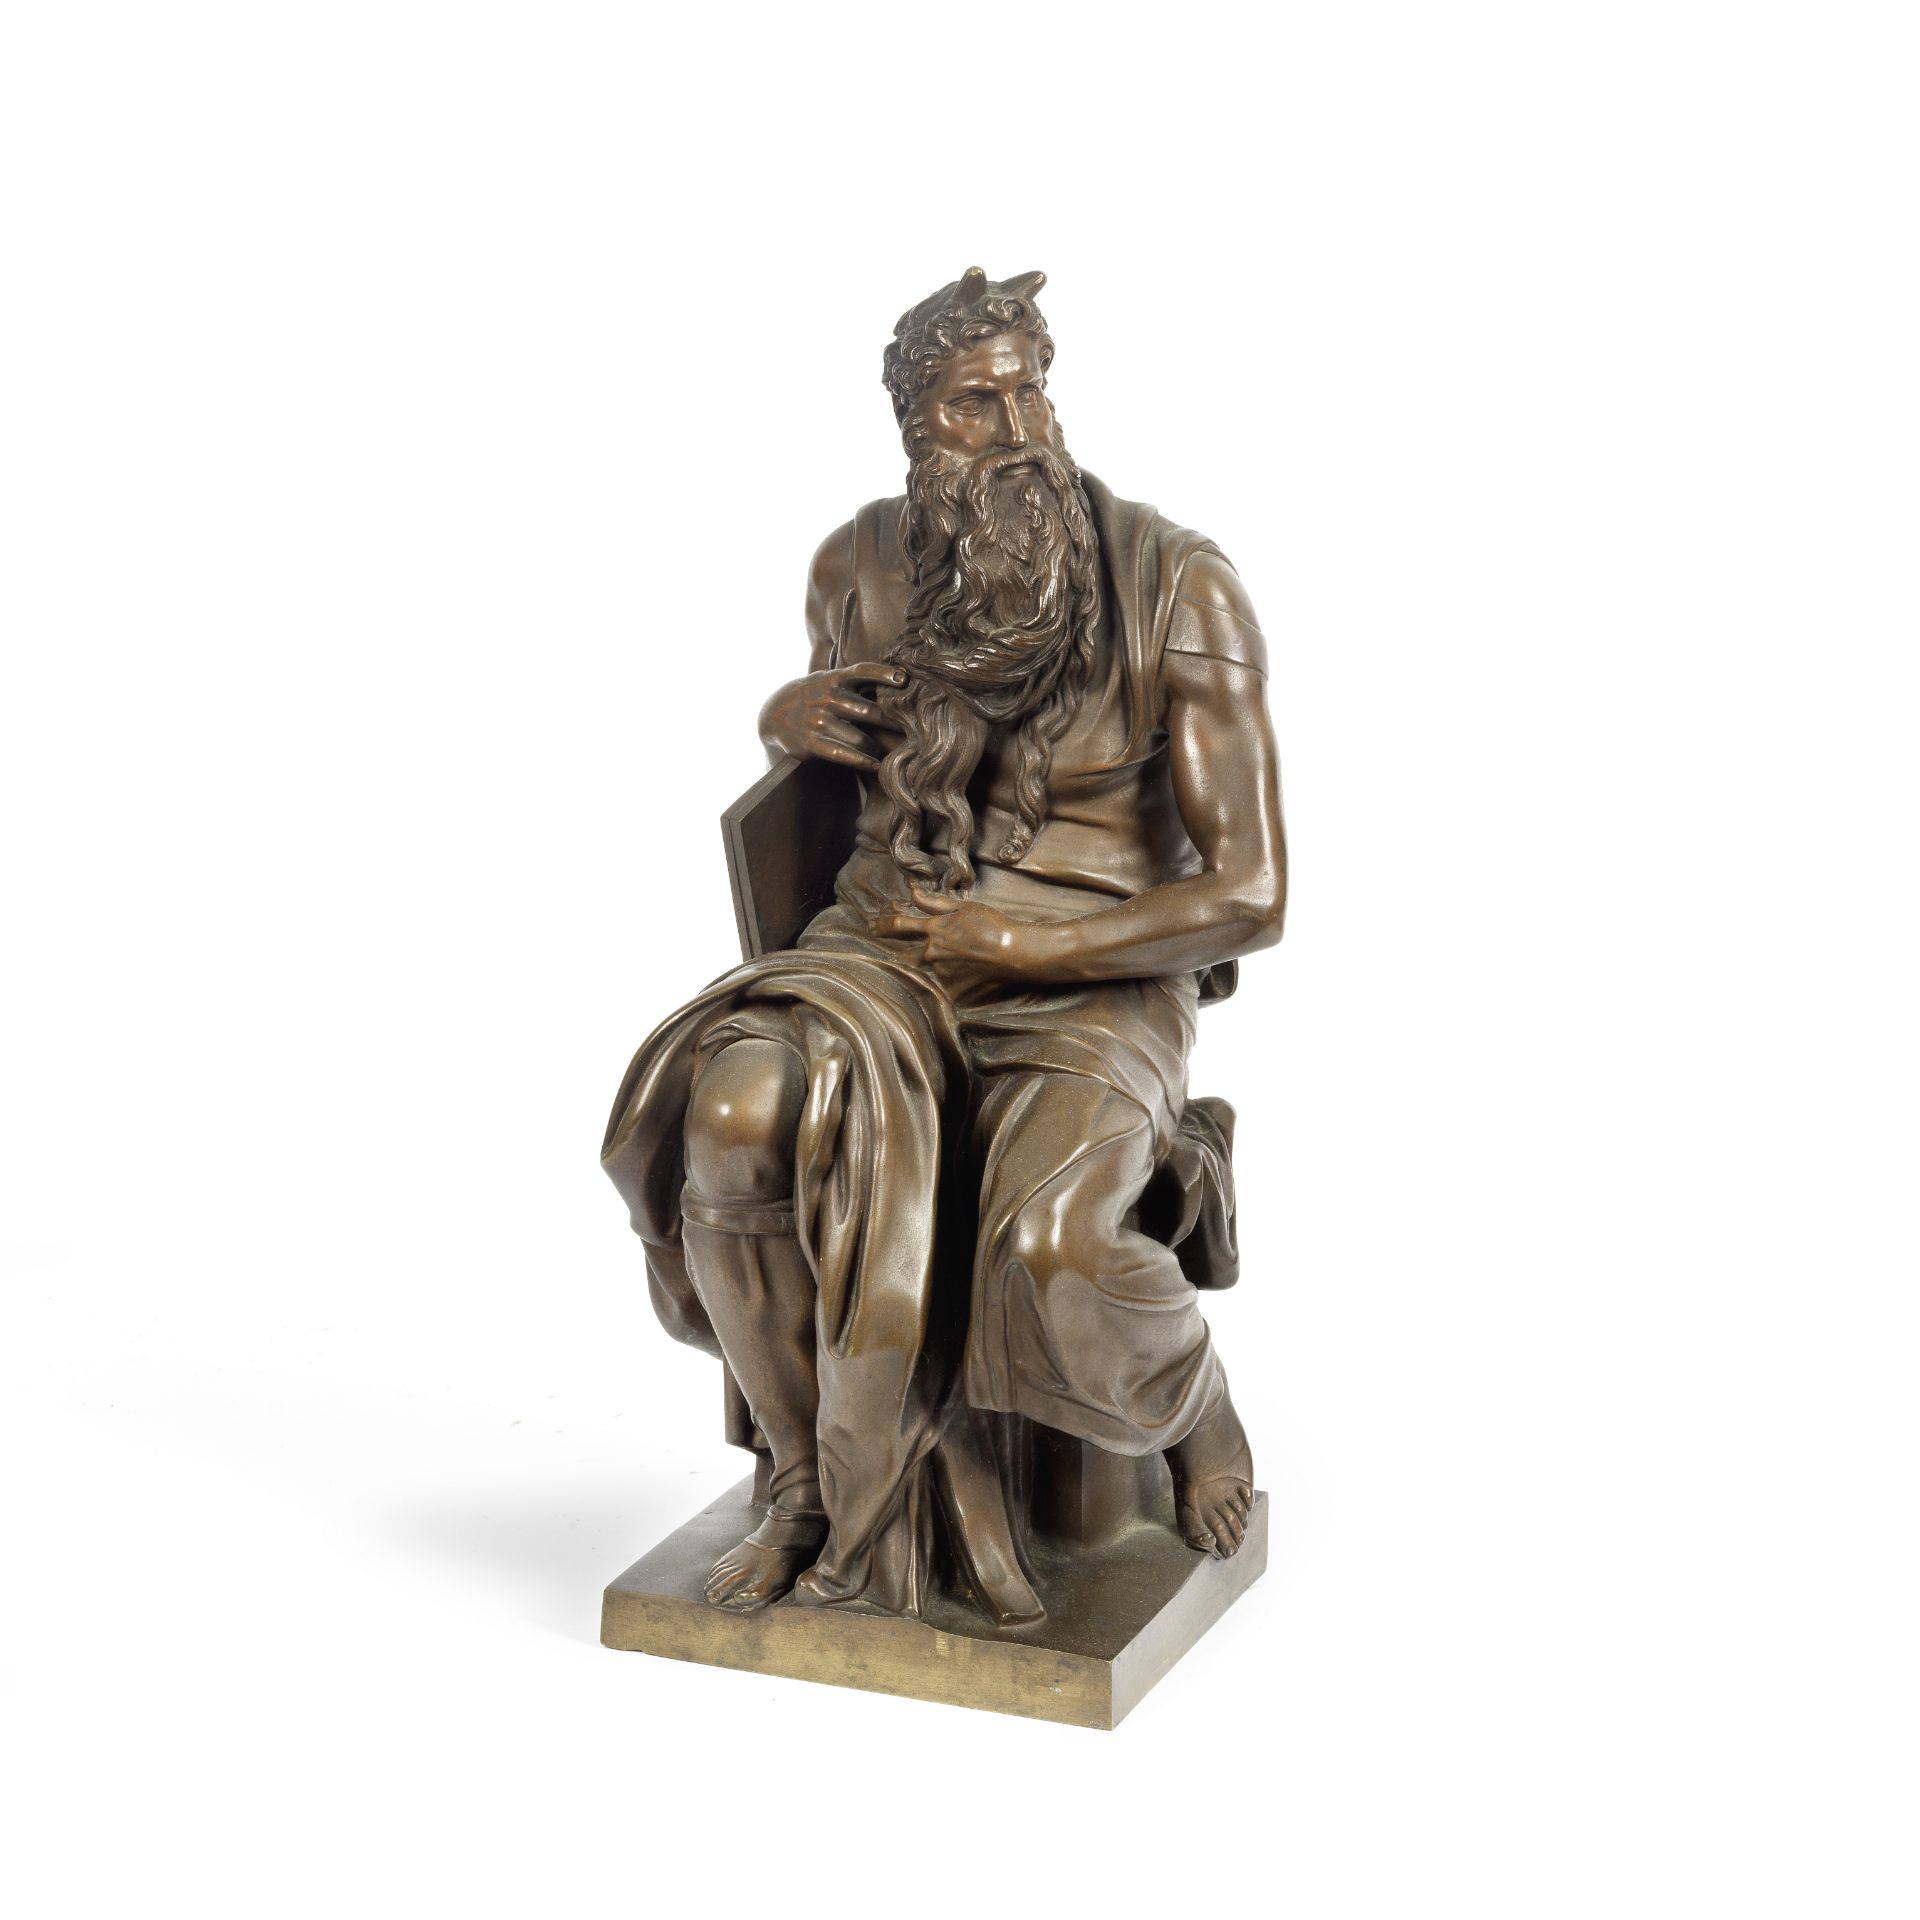 A late 19th century Belgium patinated bronze figure of Moses after Michelangelo (Italian, 1475-1...